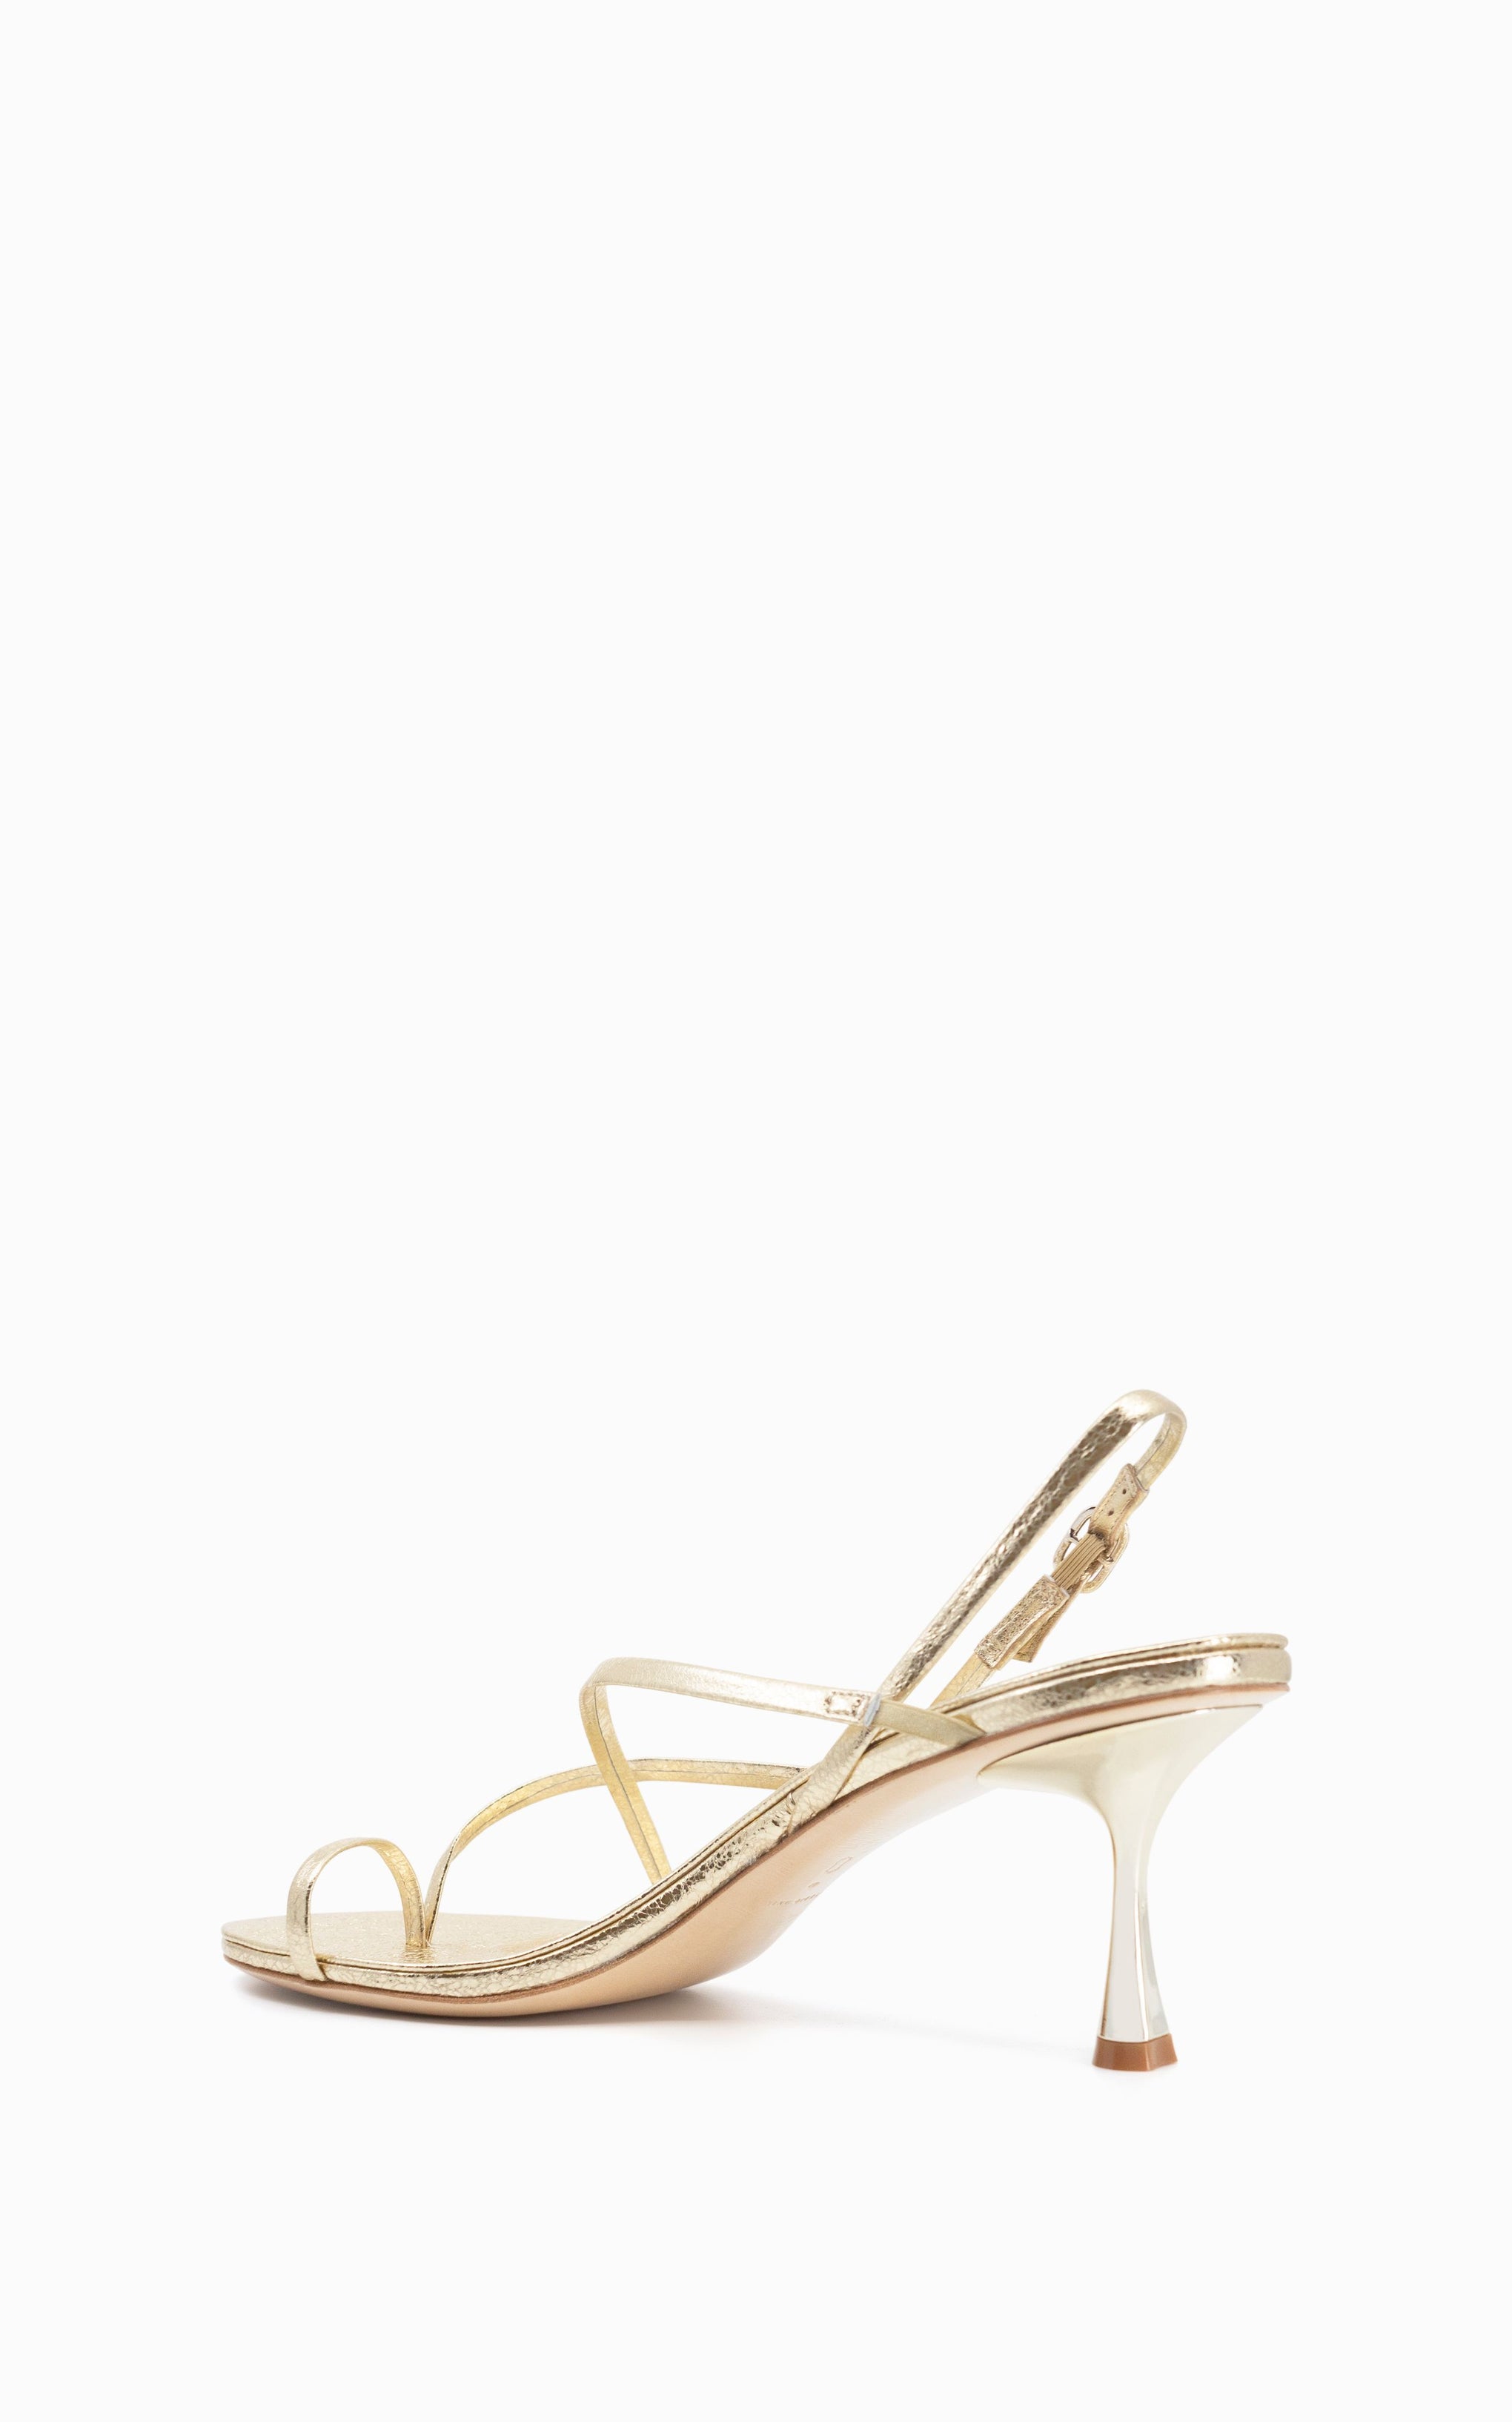 The Studio Amelia Agatha 70 Heel in Gold available at The New Trend Australia